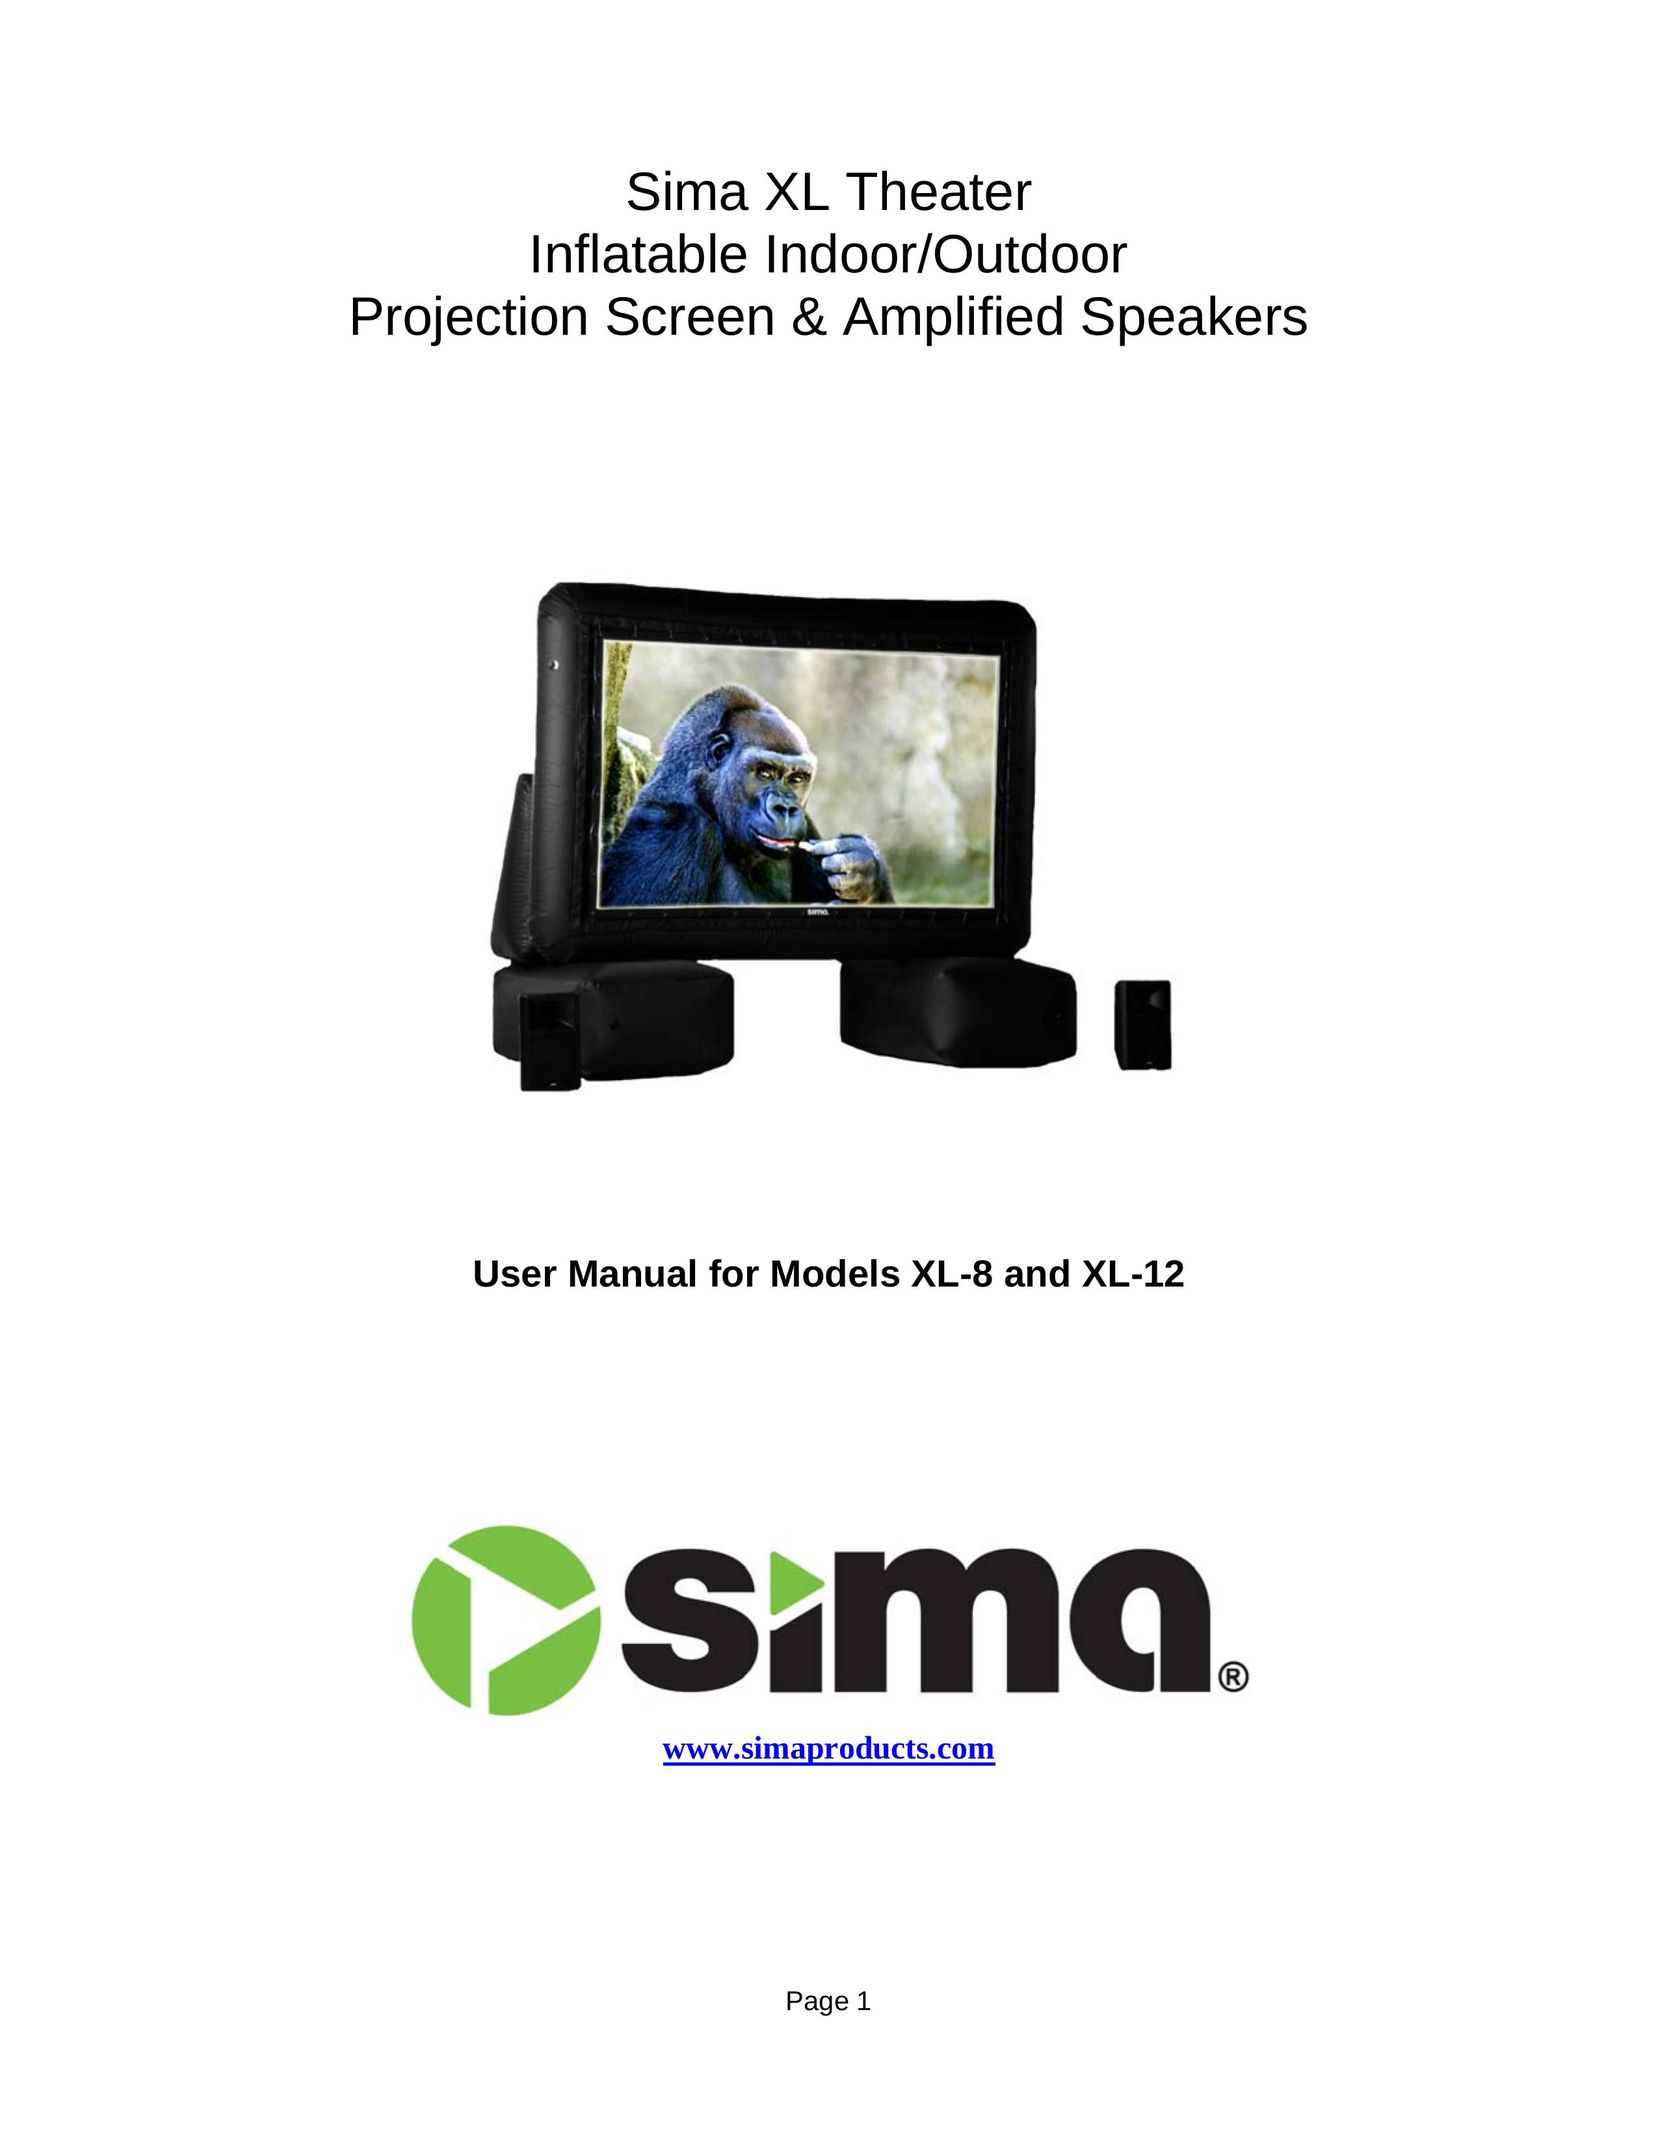 Sima Products XL-8 Home Theater System User Manual